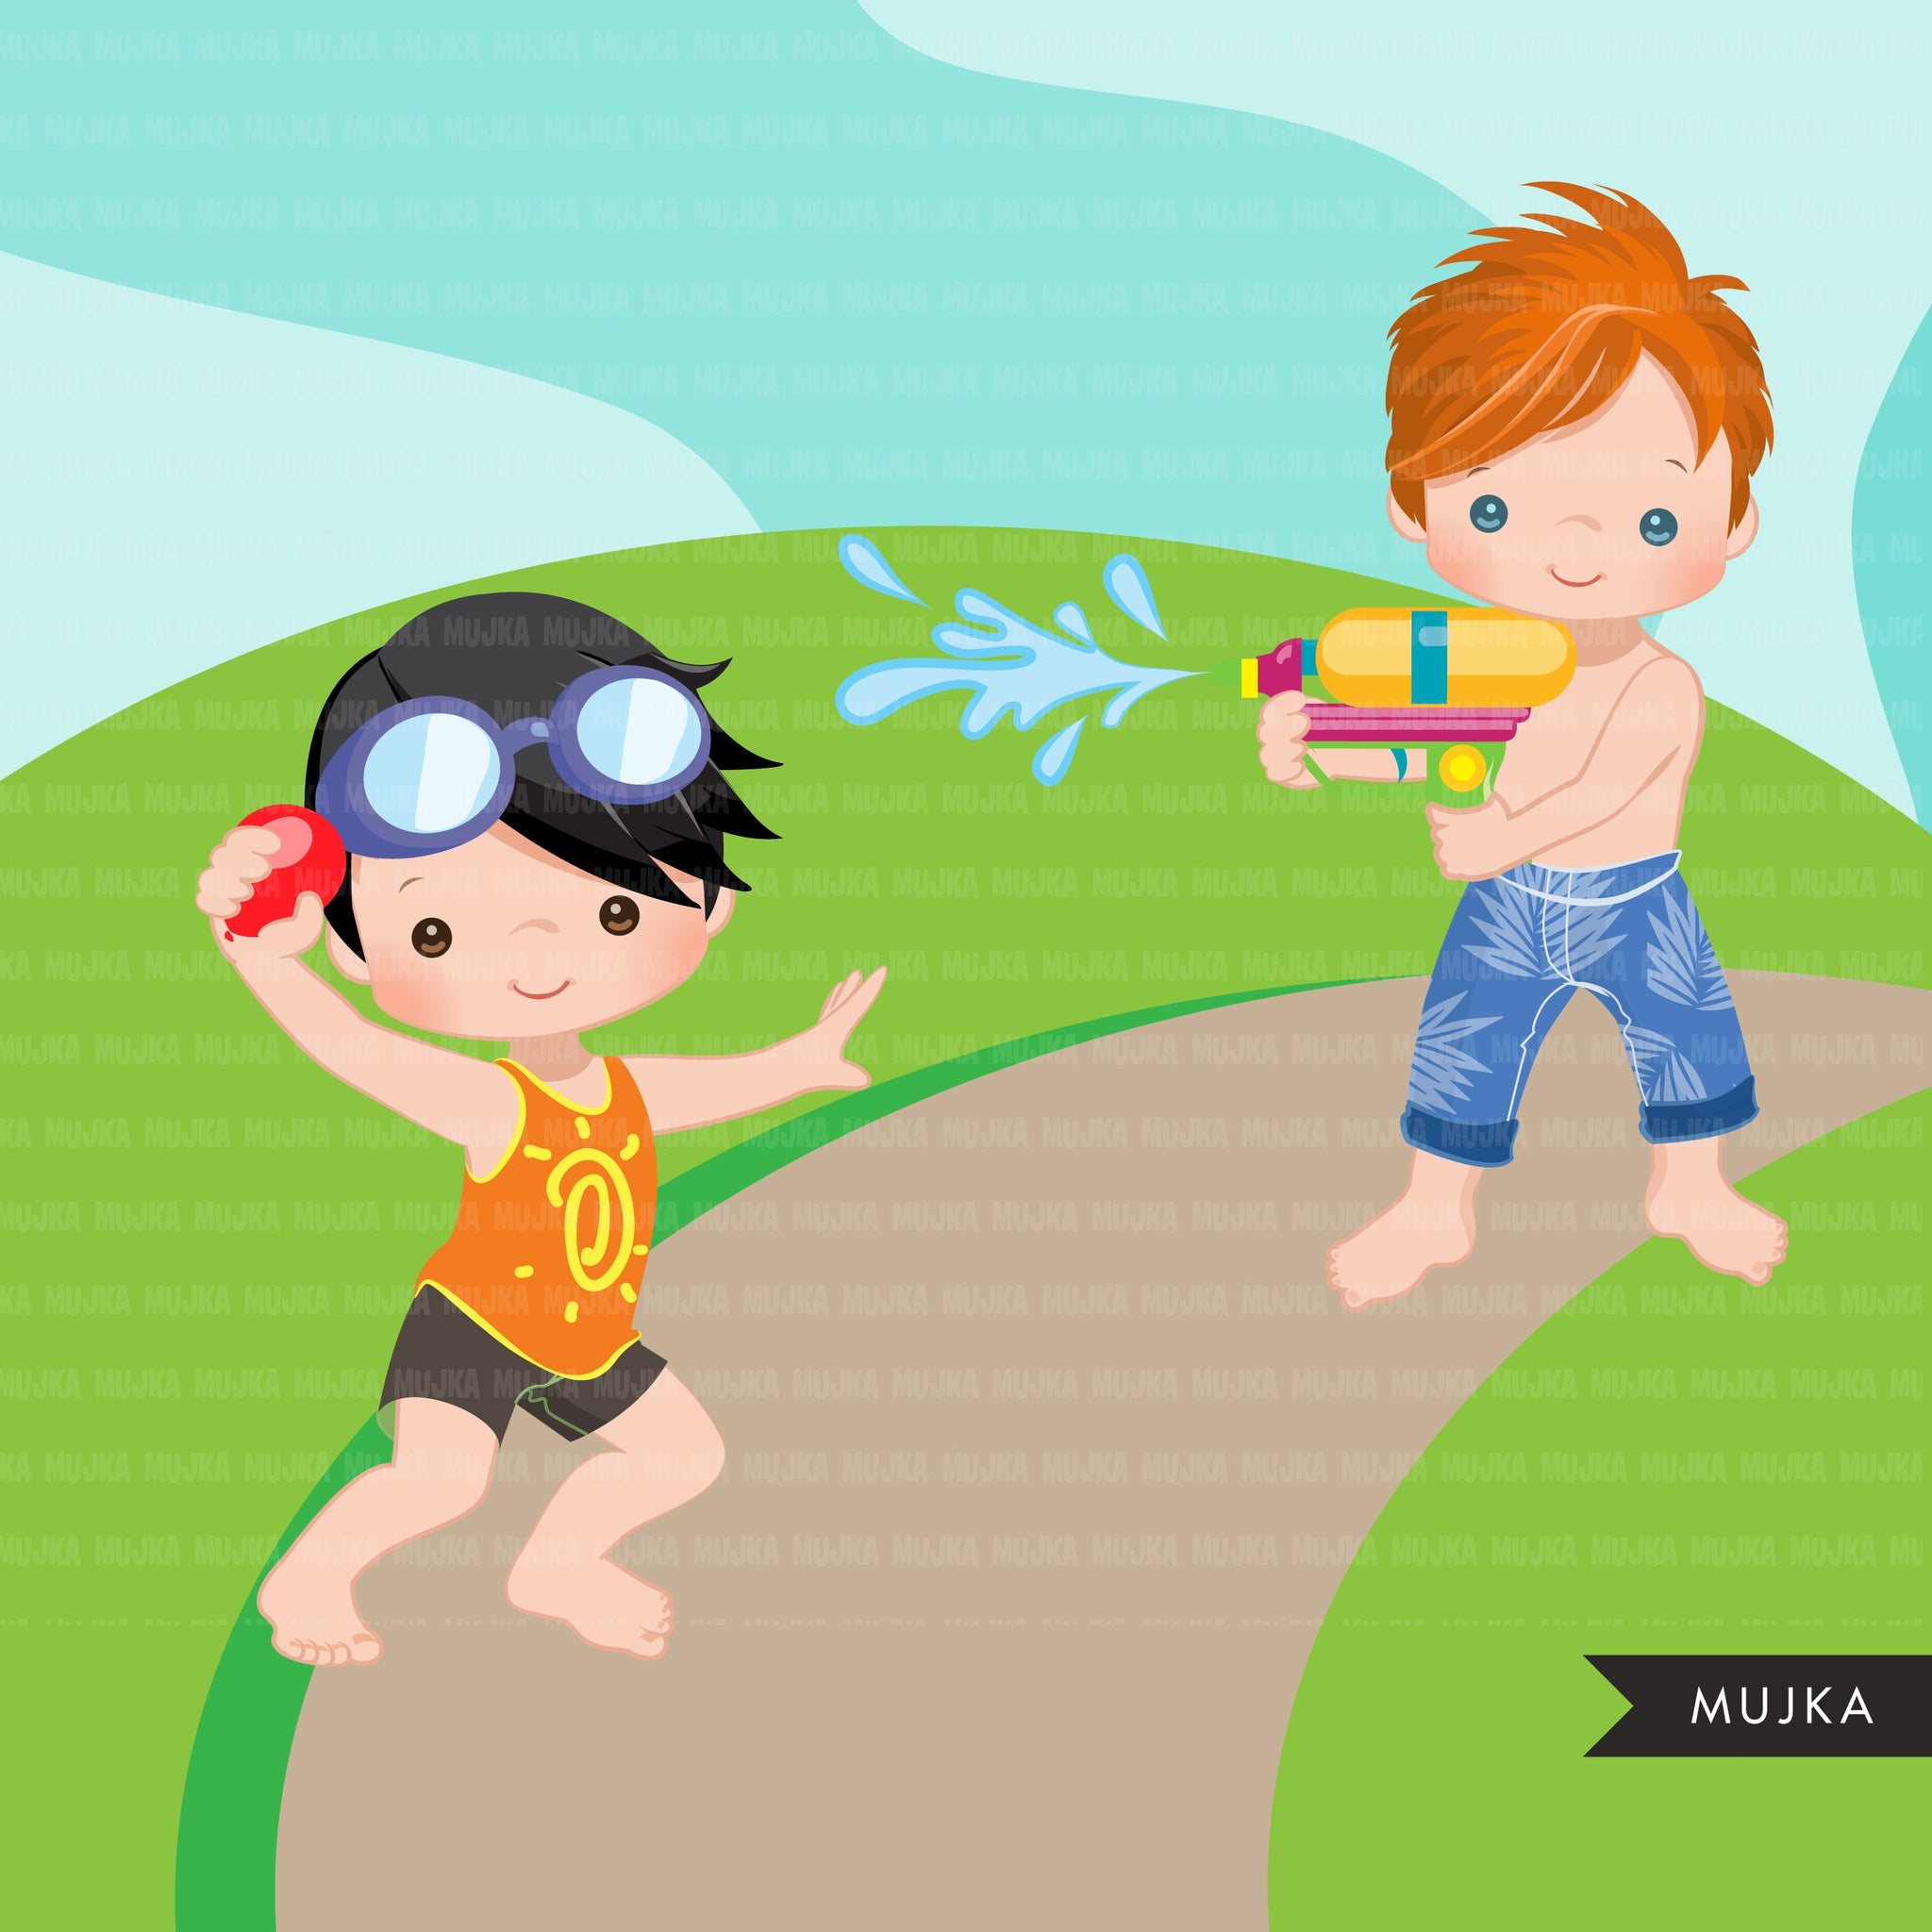 Water gun fight clipart, boys, black boys outdoors water balloon fight, summer birthday graphics, commercial use PNG clip art